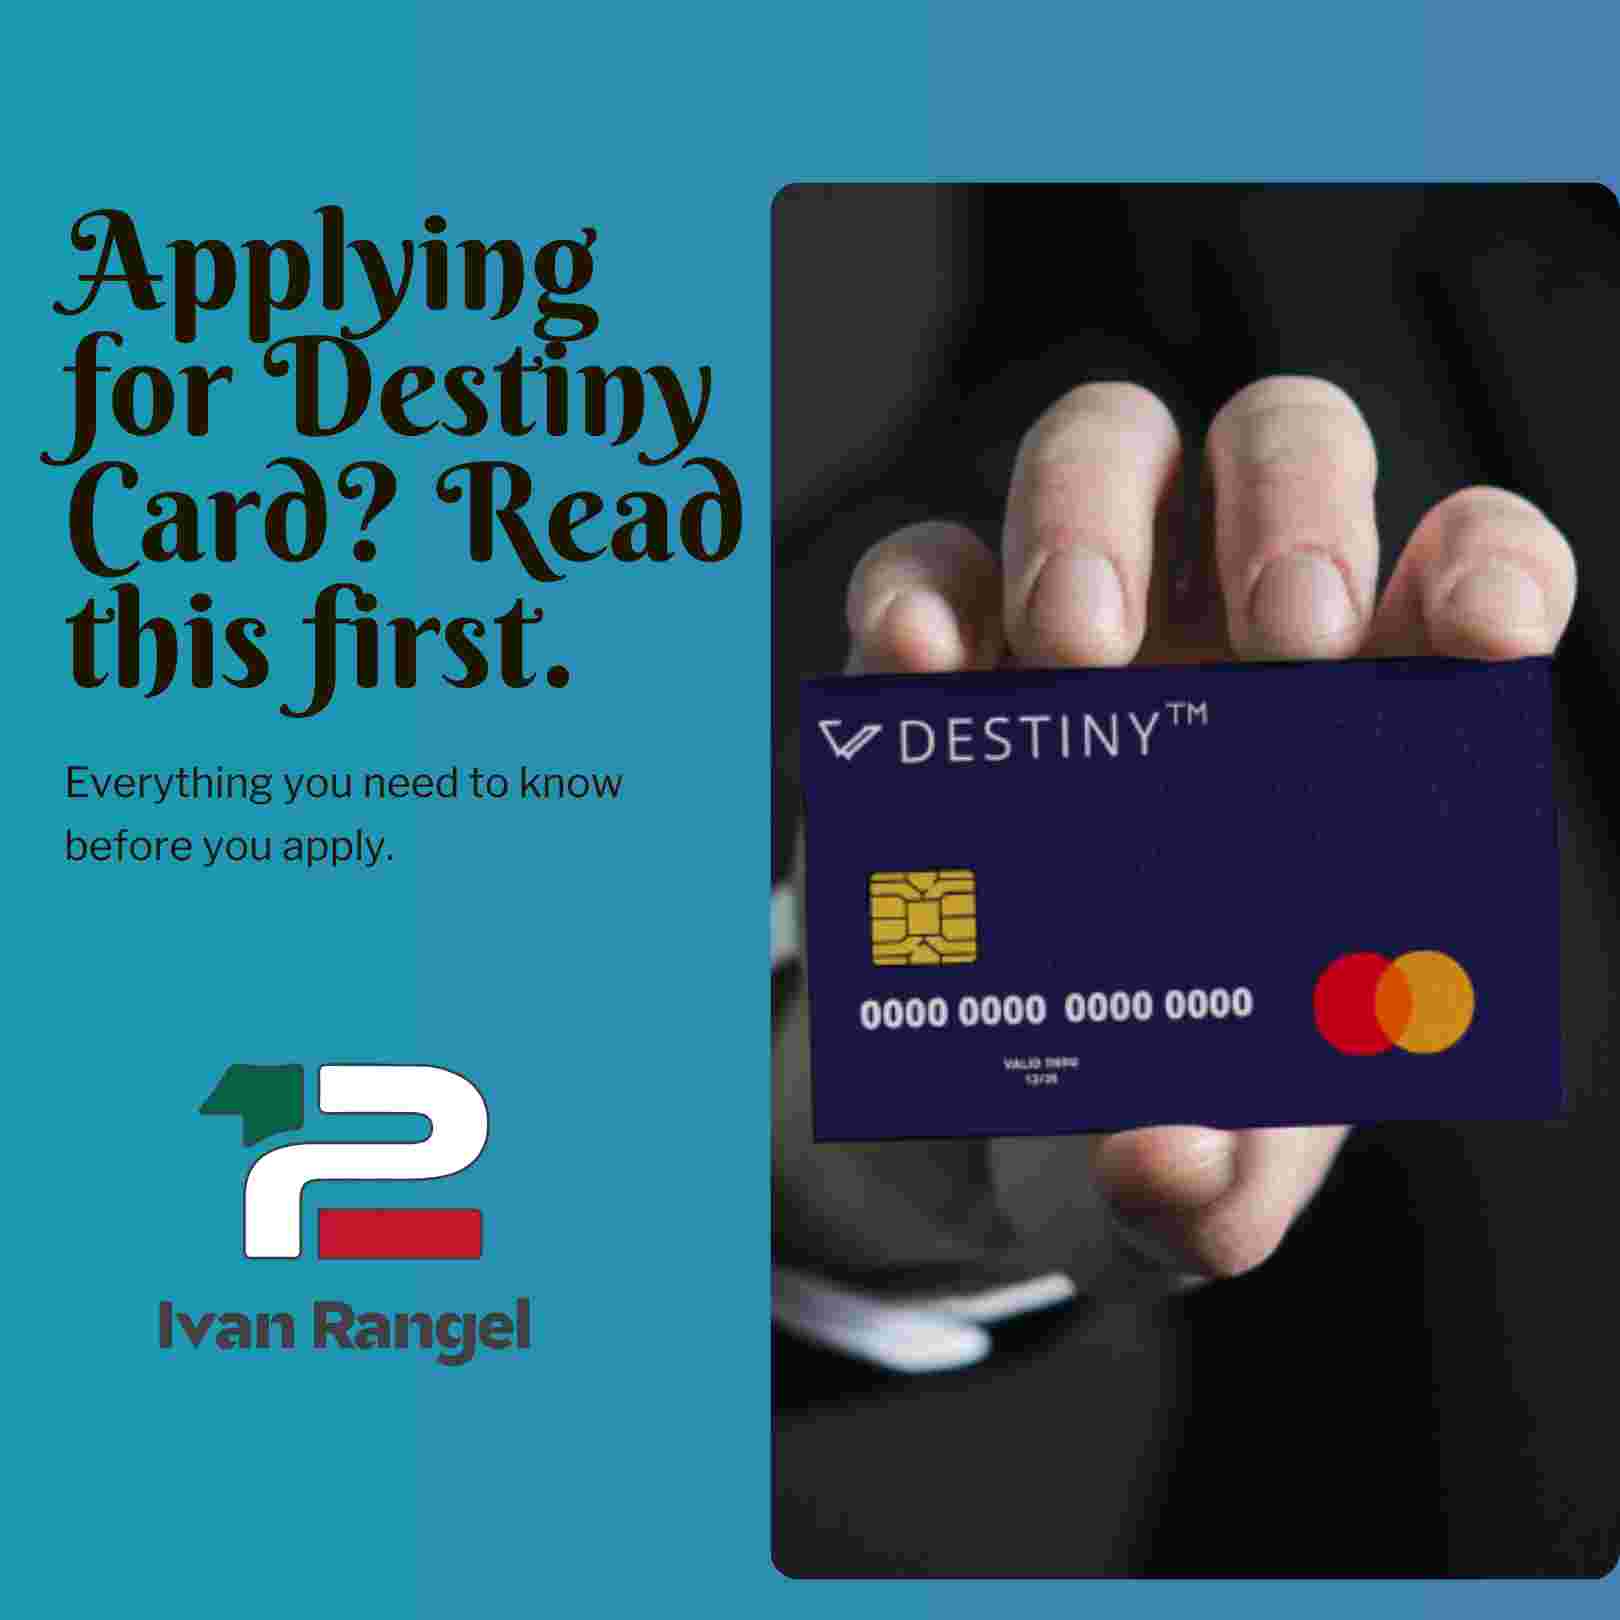 For Destiny Card, Everything You Need To Know Before You Apply